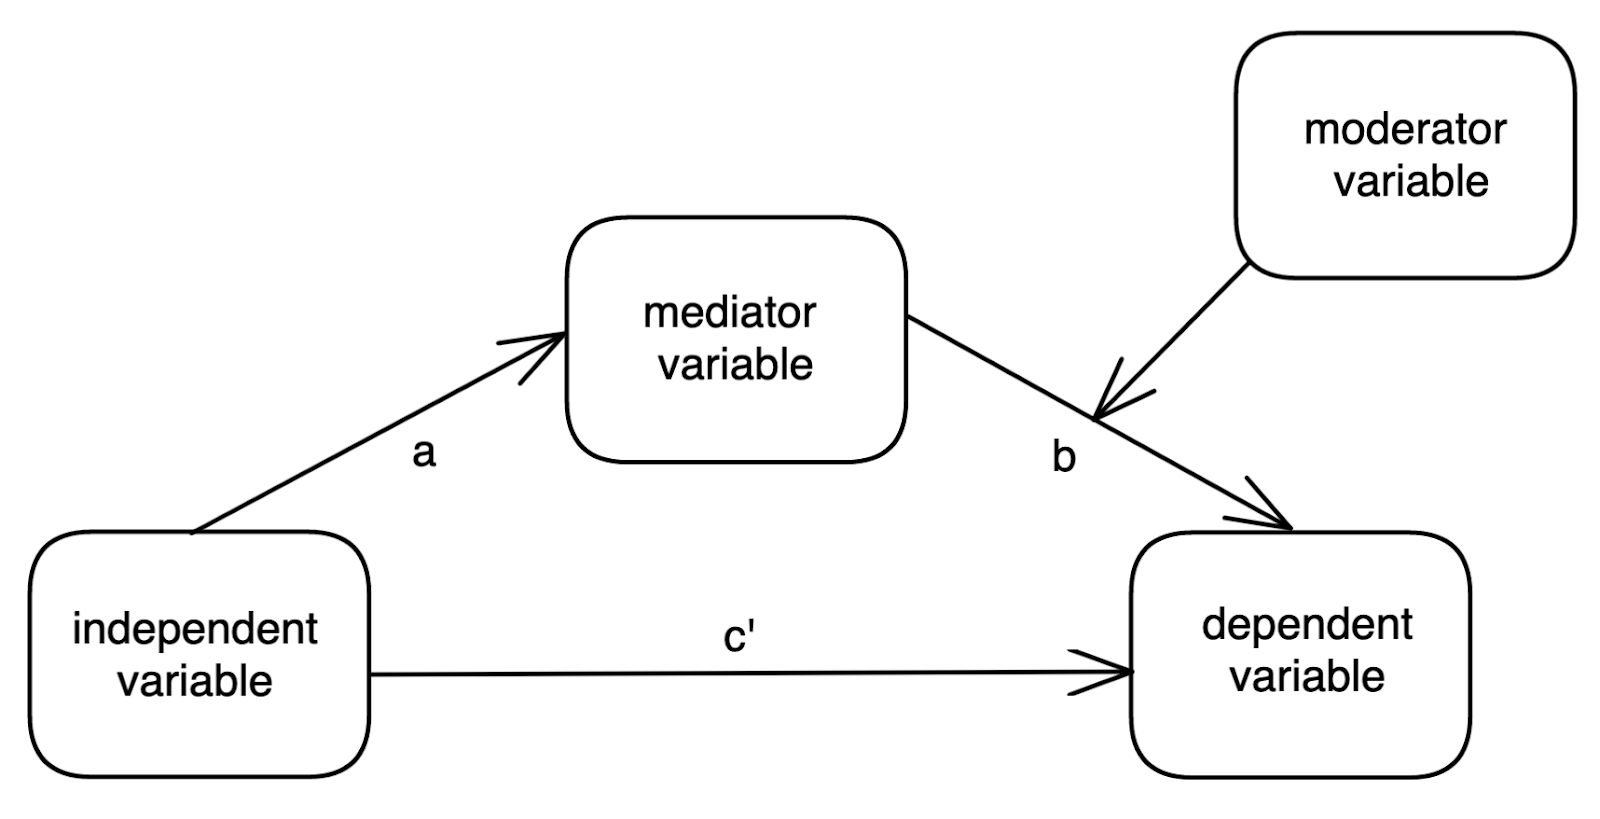 A model of mediation with moderation showing Path a connecting an independent variable to a mediator variable, path b connecting the mediator variable to the dependent variable, and path c' showing the direct path from the independent variable to the dependent variable. To the right the moderator variable is shown intersecting the b path between the mediator variable and the moderator variable.